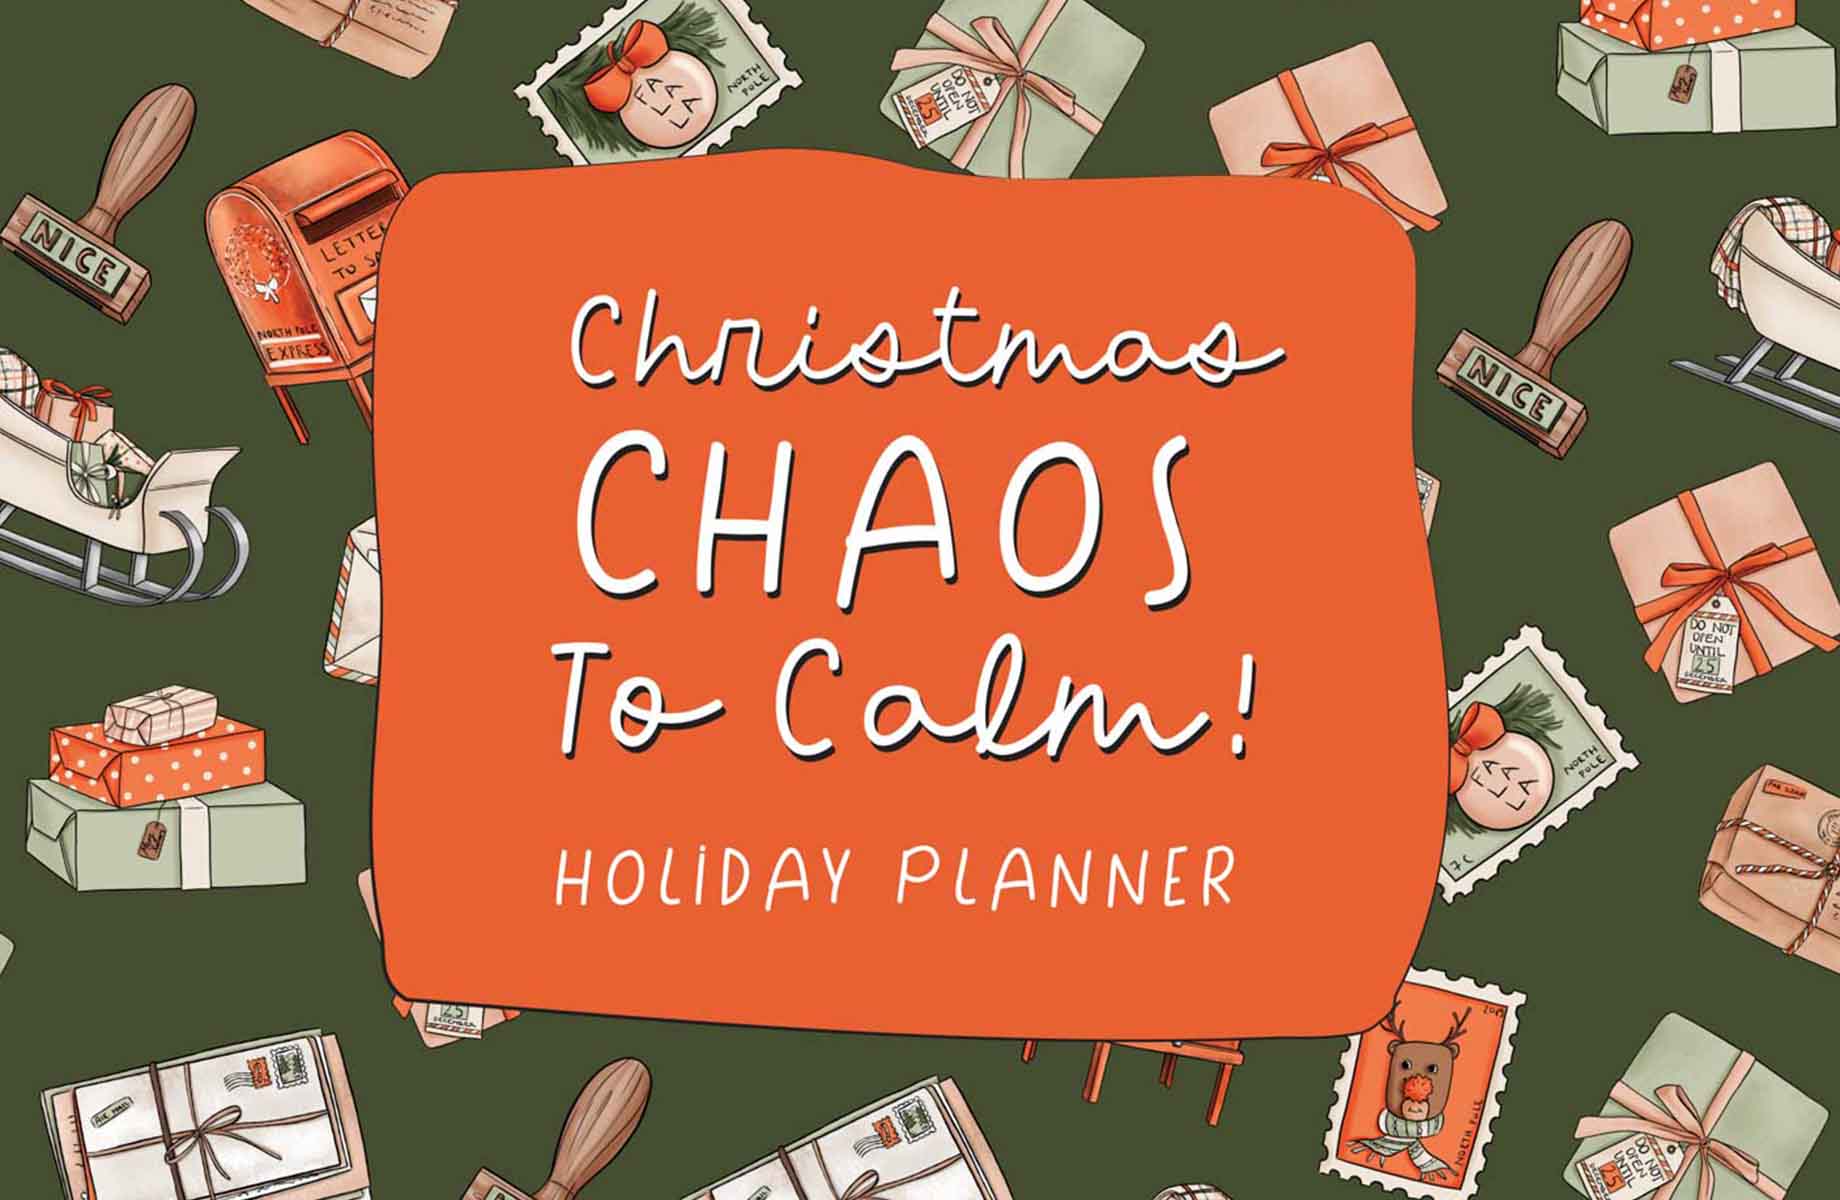 FREE Christmas Chaos To Calm Planner!